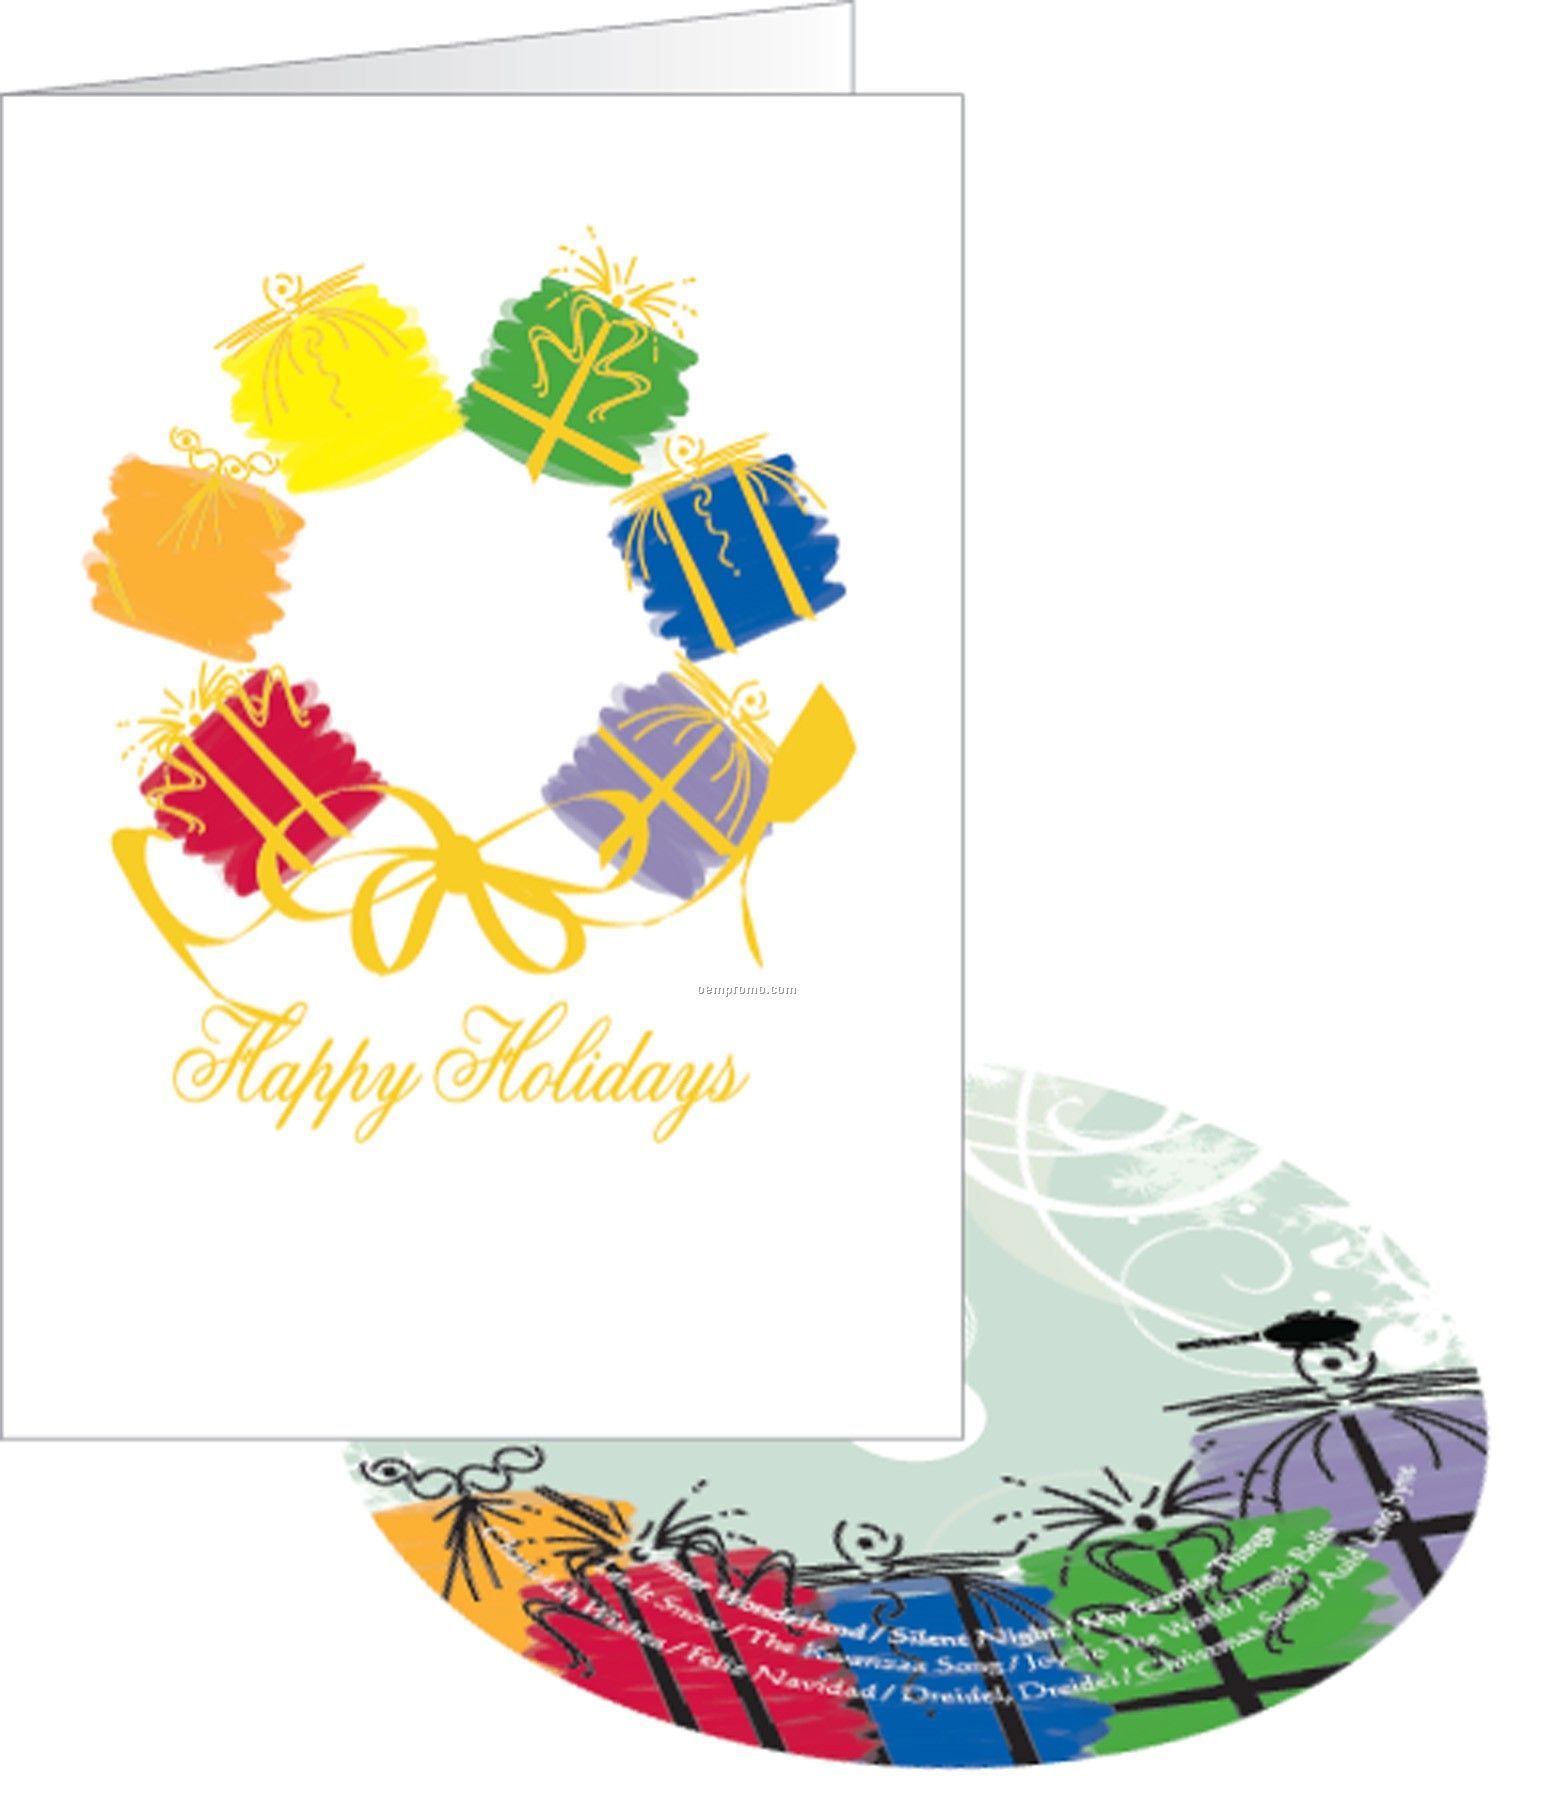 Wreath Of Presents Holiday Greeting Card With Matching CD